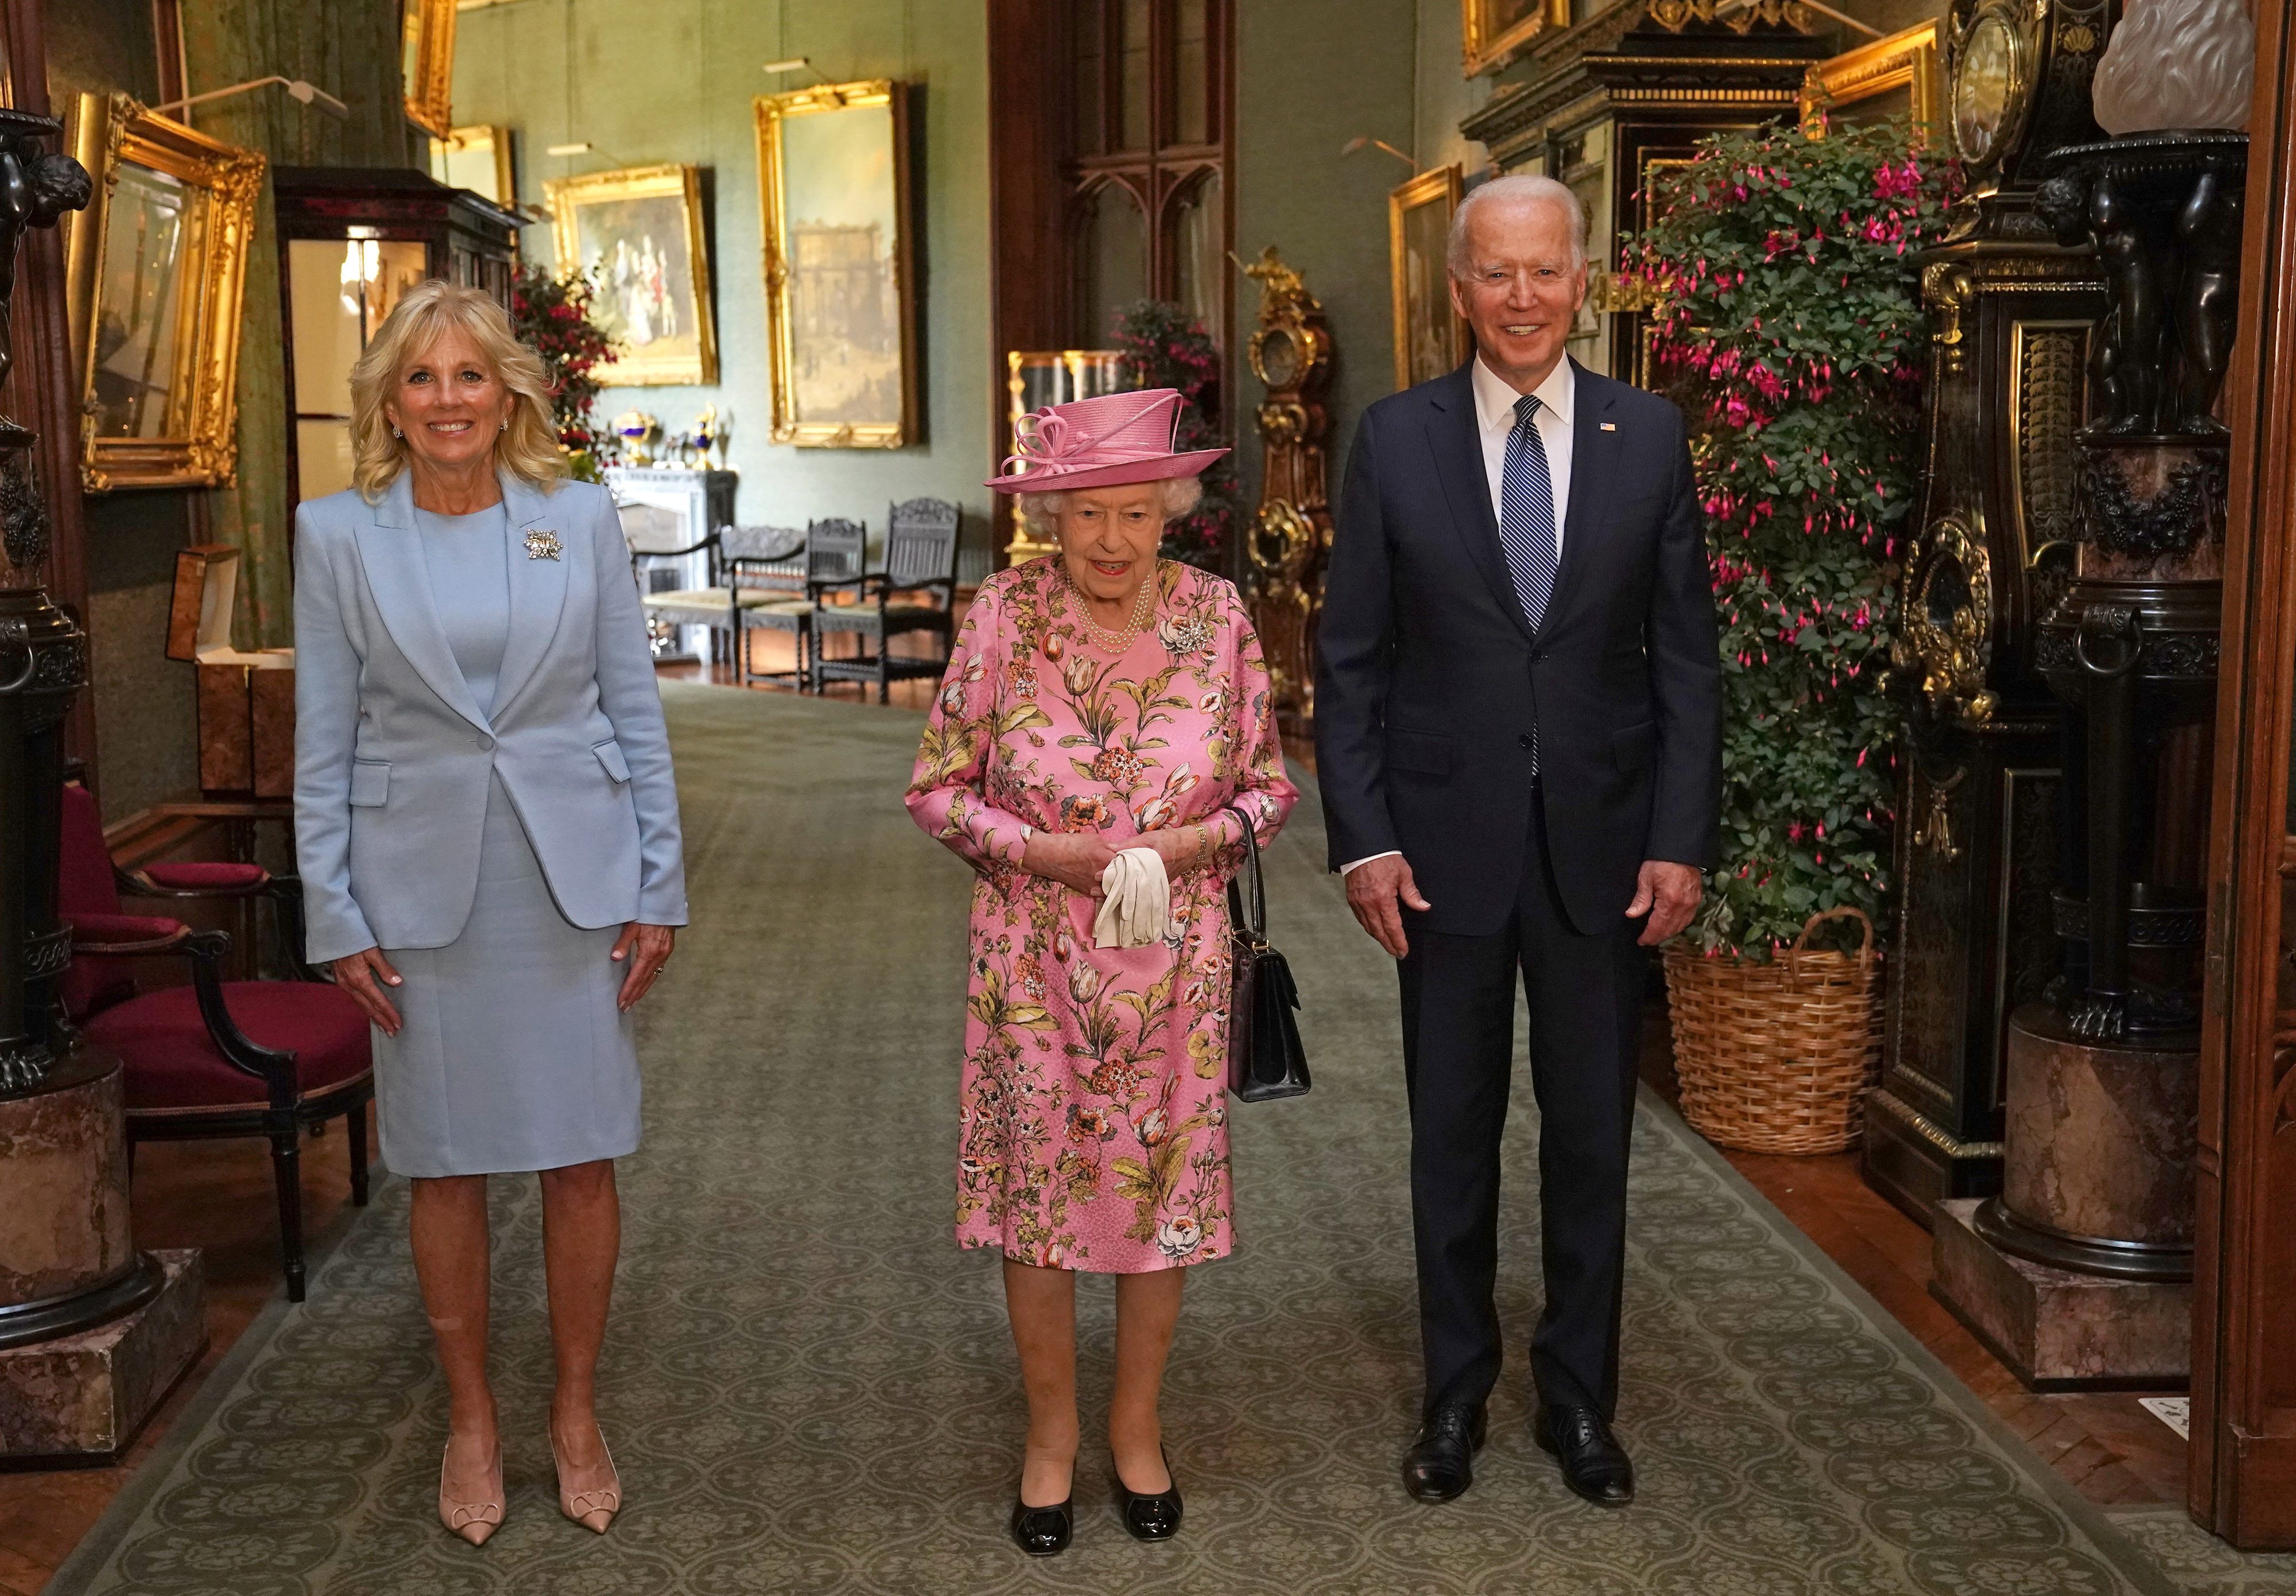 Britain's Queen Elizabeth stands with U.S. President Joe Biden and first lady Jill Biden in the Grand Corridor during their visit at Windsor Castle, in Windsor, Britain, June 13, 2021. Photo: Steve Parsons/Pool via Reuters